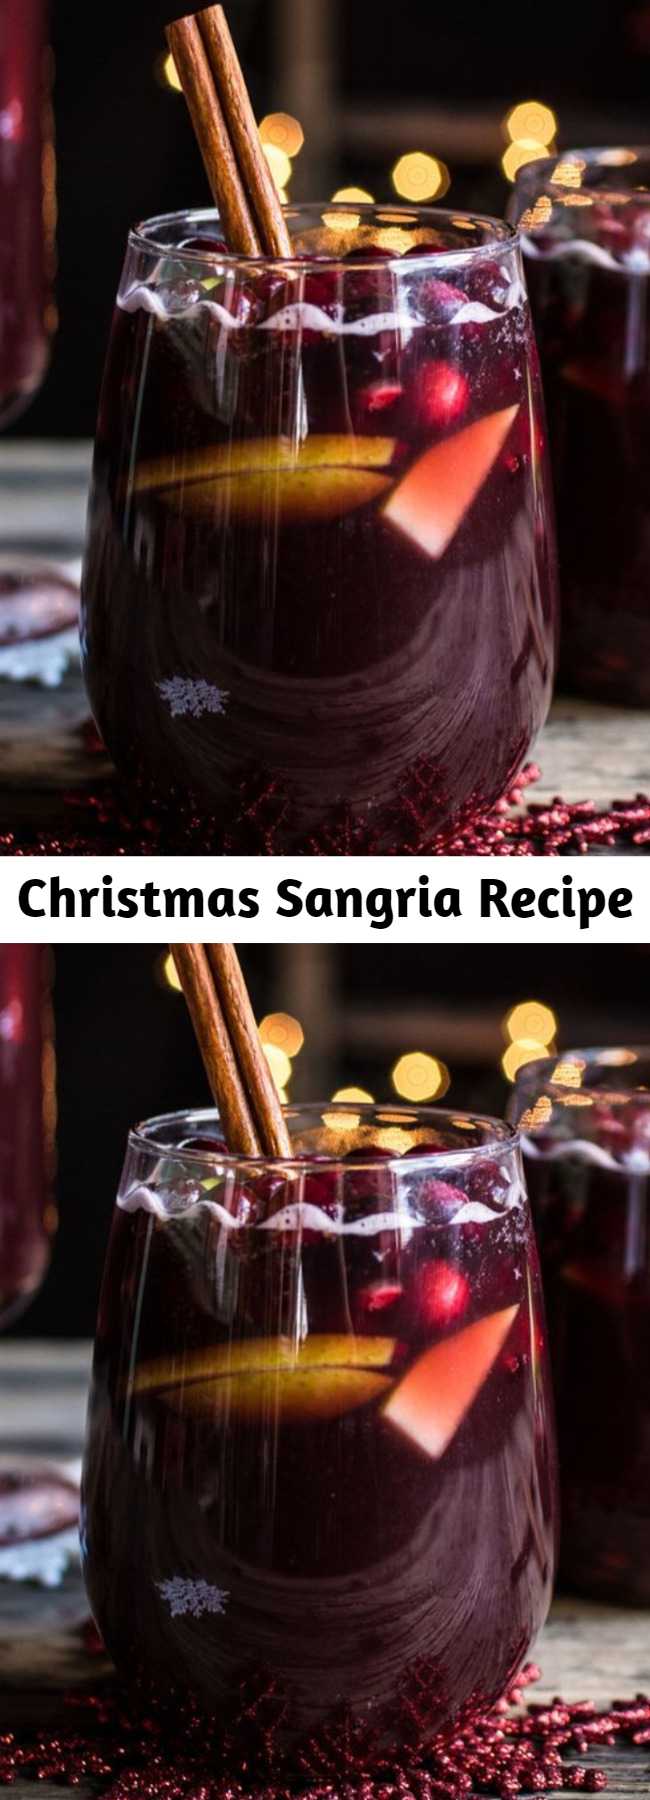 Easy Christmas Sangria Recipe - No holiday party is complete without a festive drink, and this wintry sangria is just what your guests need to stay holly and jolly. Plus, it can be prepared ahead of time so you can focus on getting the rest of the party set up—now that’s what we call a Christmas miracle! It’s easy and festive!